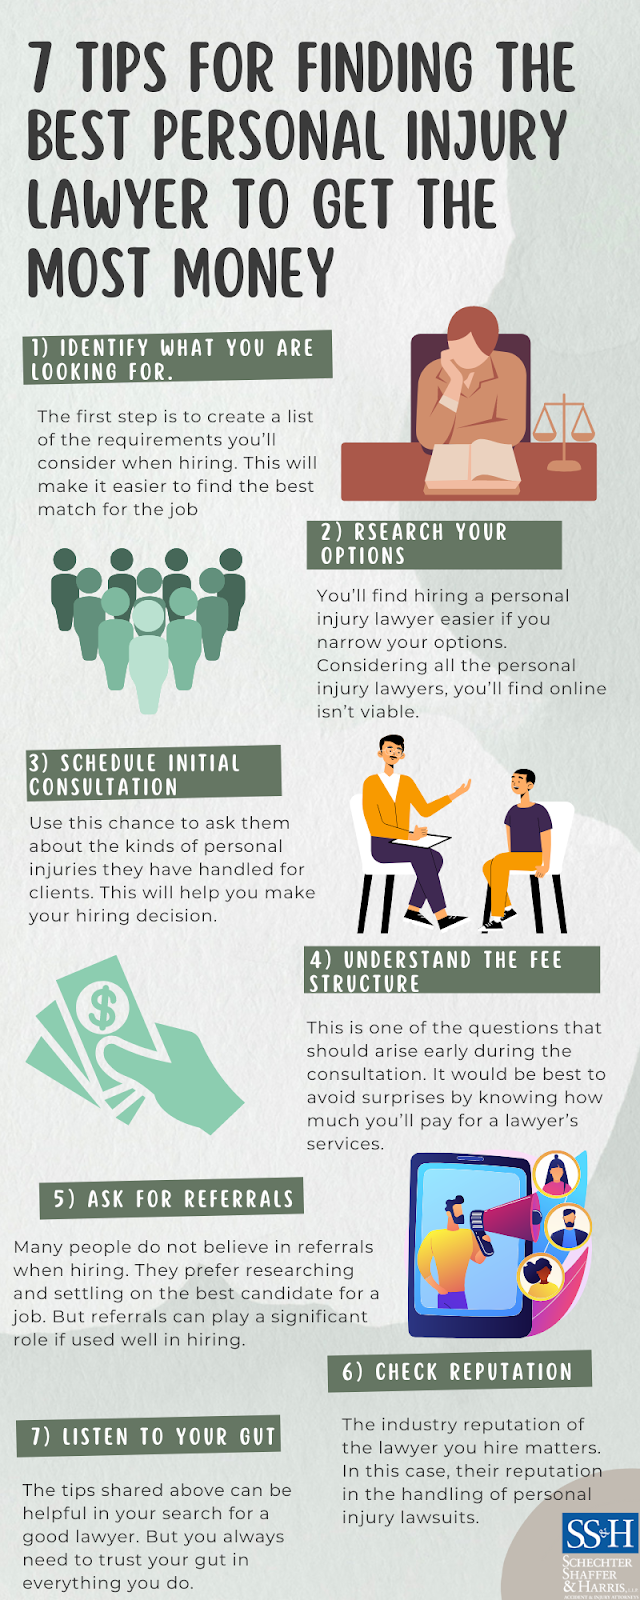 7 Tips for Finding the Best Personal Injury Lawyer to Get the Most Money